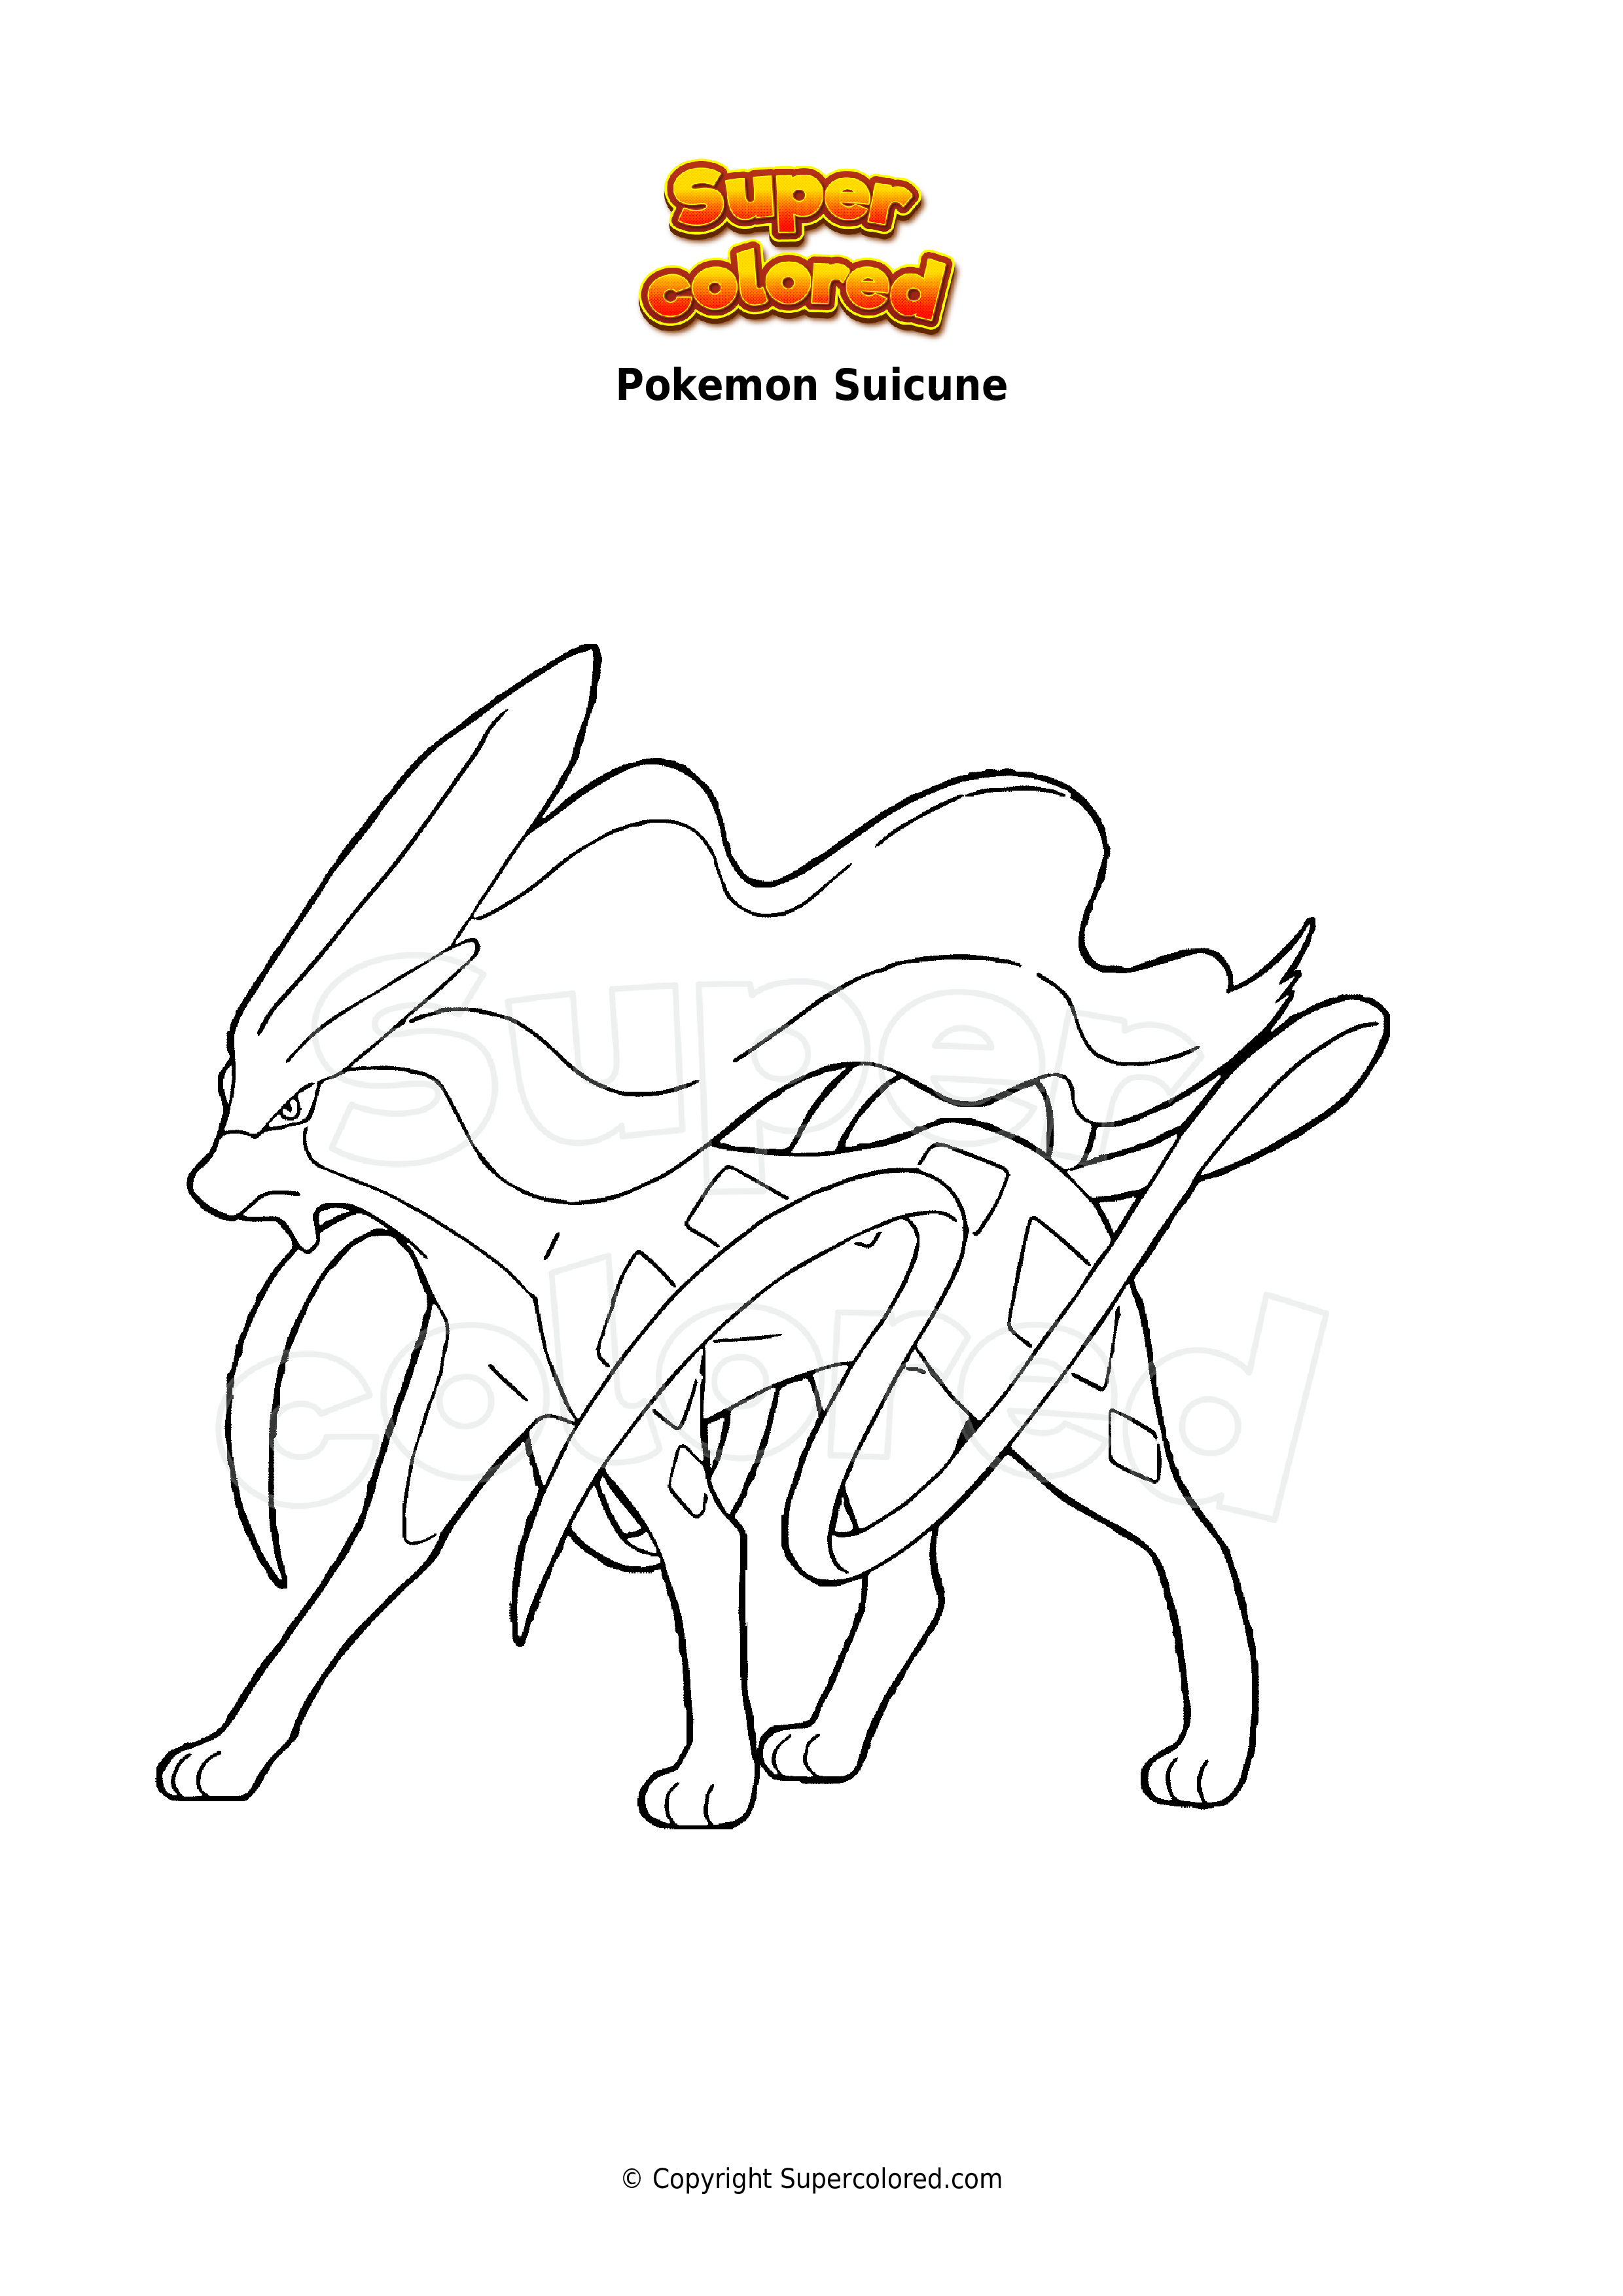 Pokemon Suicune Coloring Coloring Pages